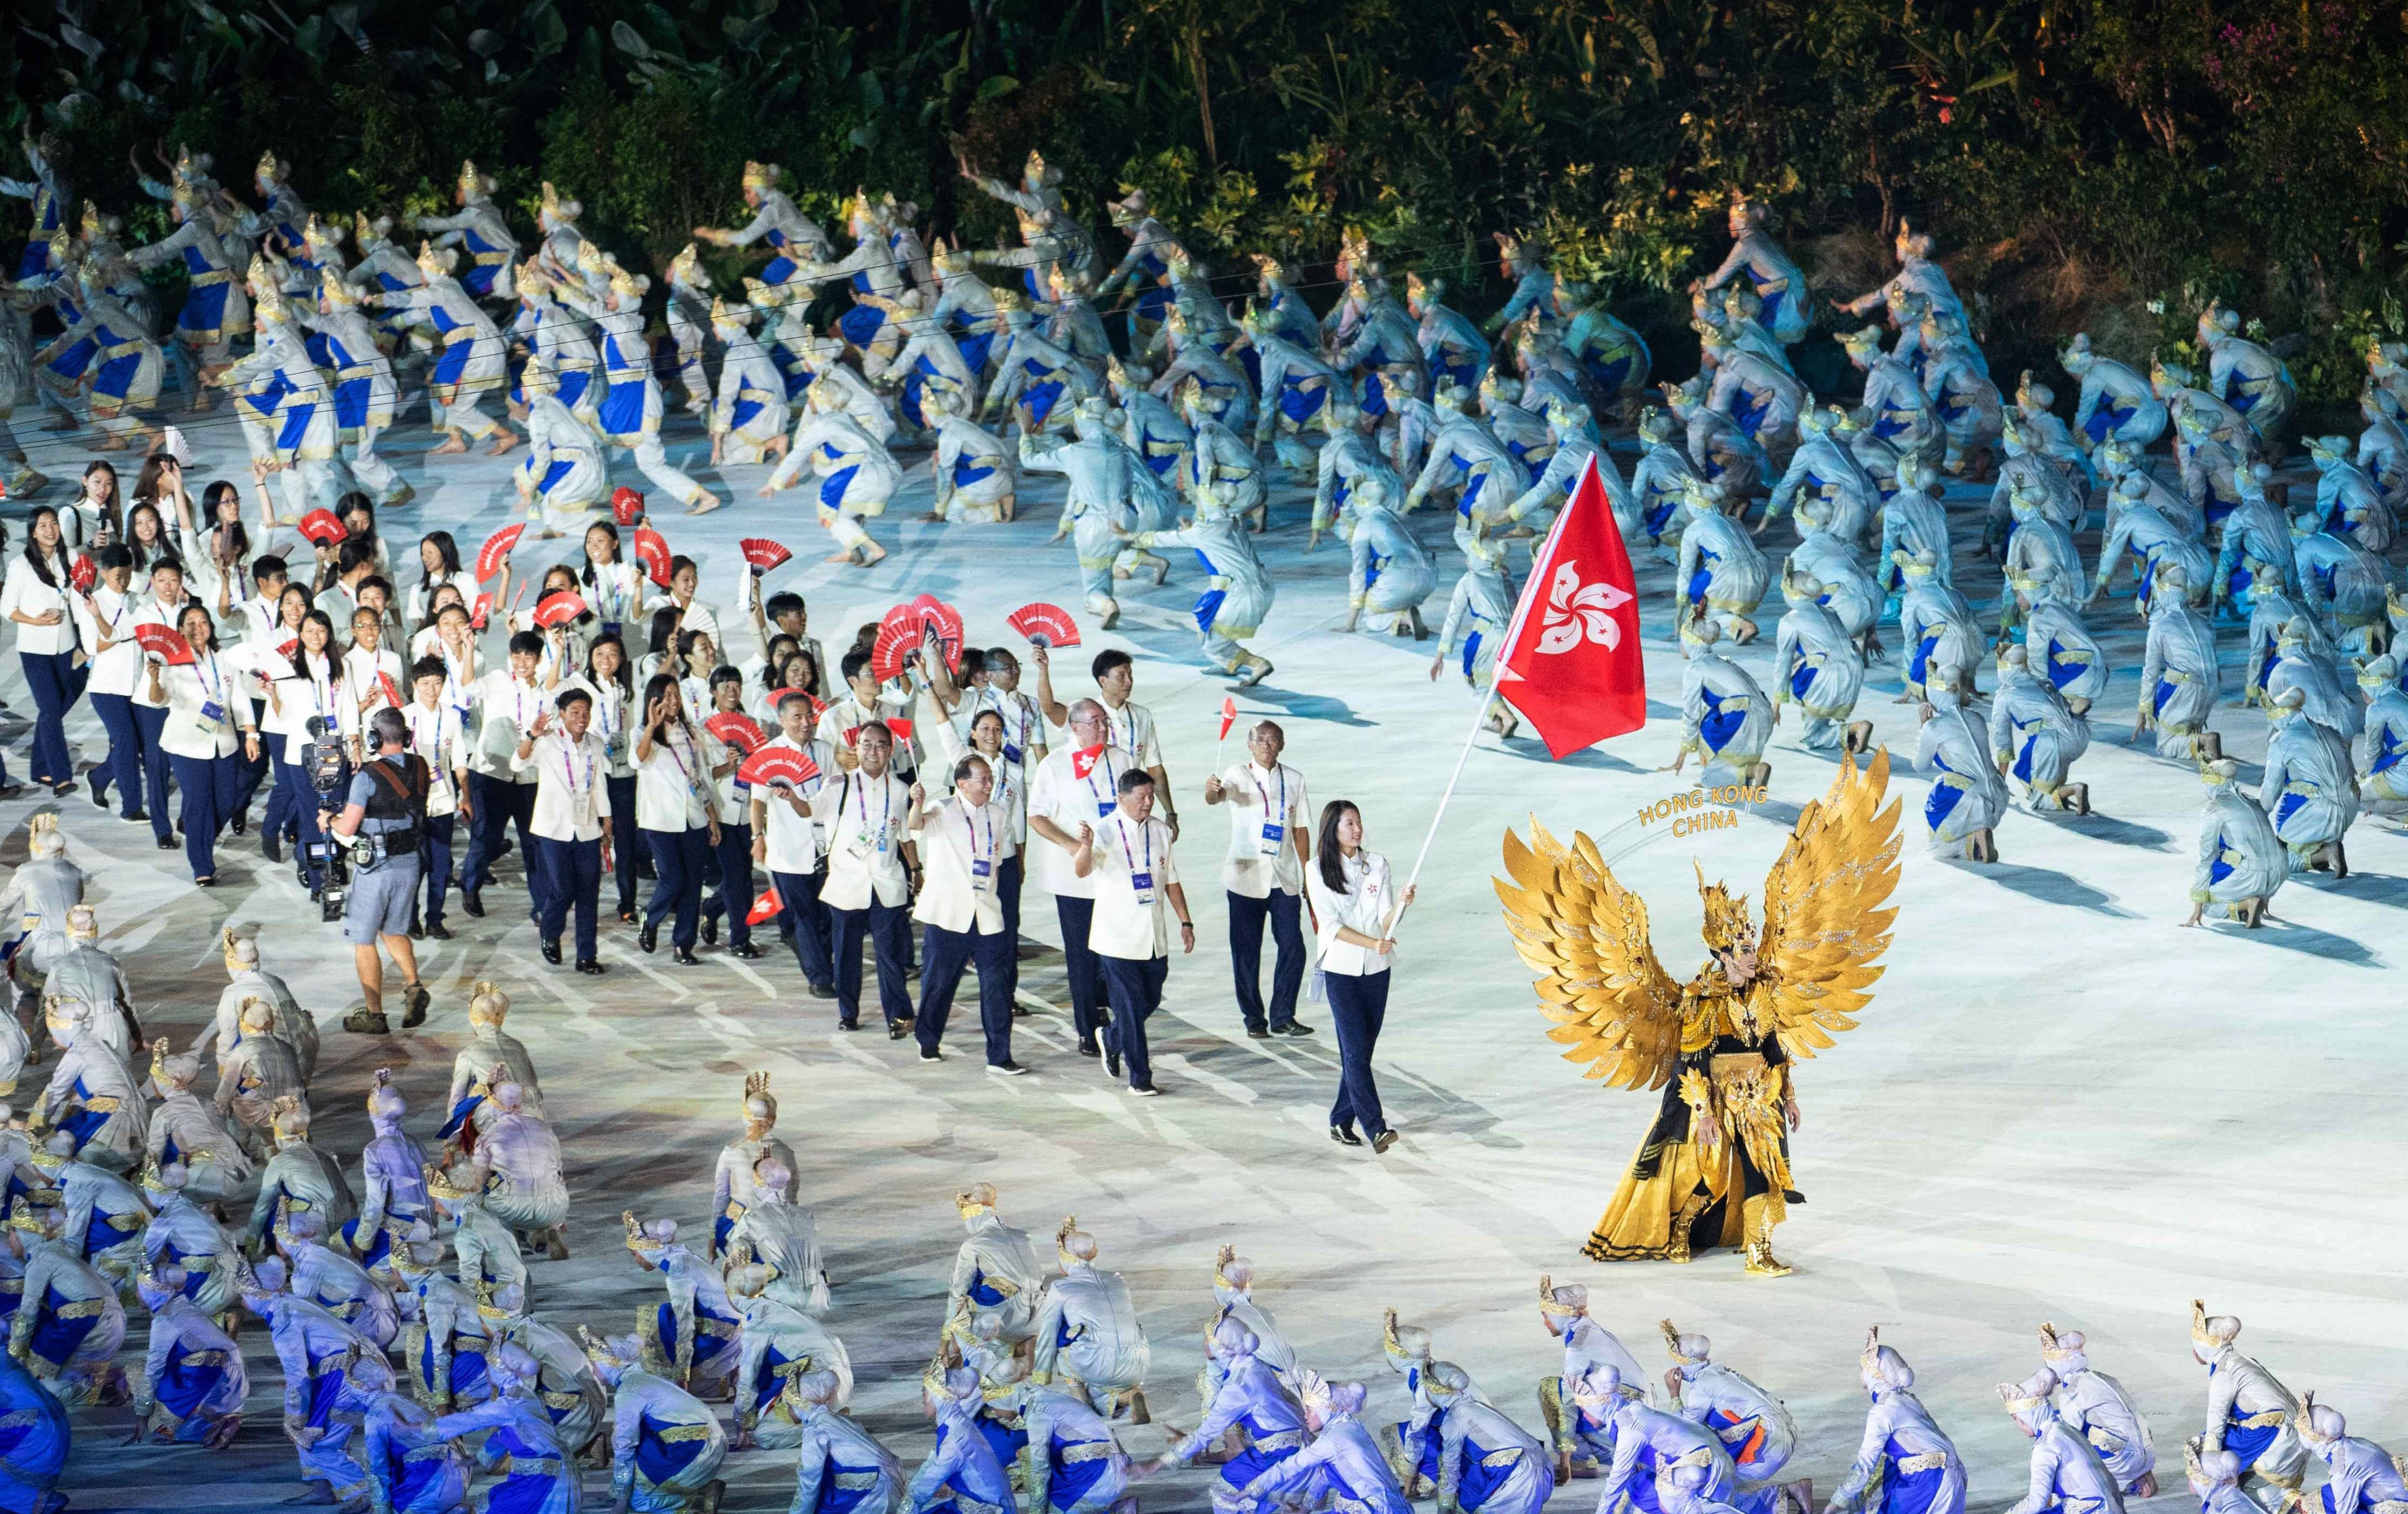 The Hong Kong delegation, led by flag bearer Vivian Kong, arrives at the opening ceremony for the Asian Games in Jakarta. Photo: Xinhua